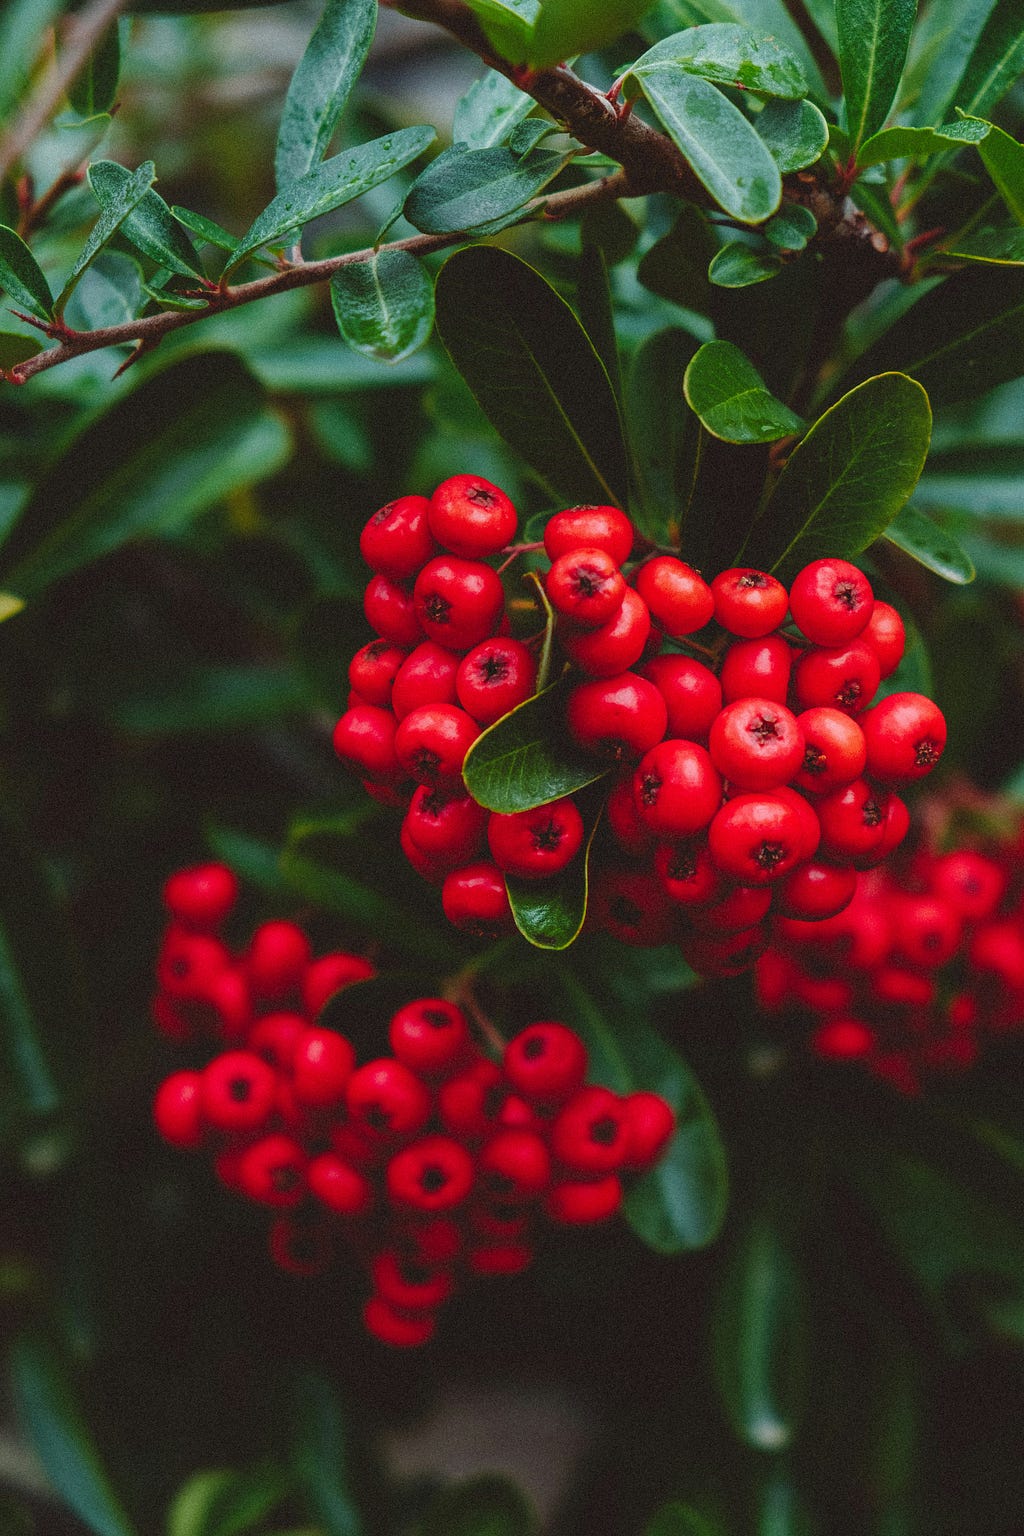 bunches of red berries hanging from green leaves